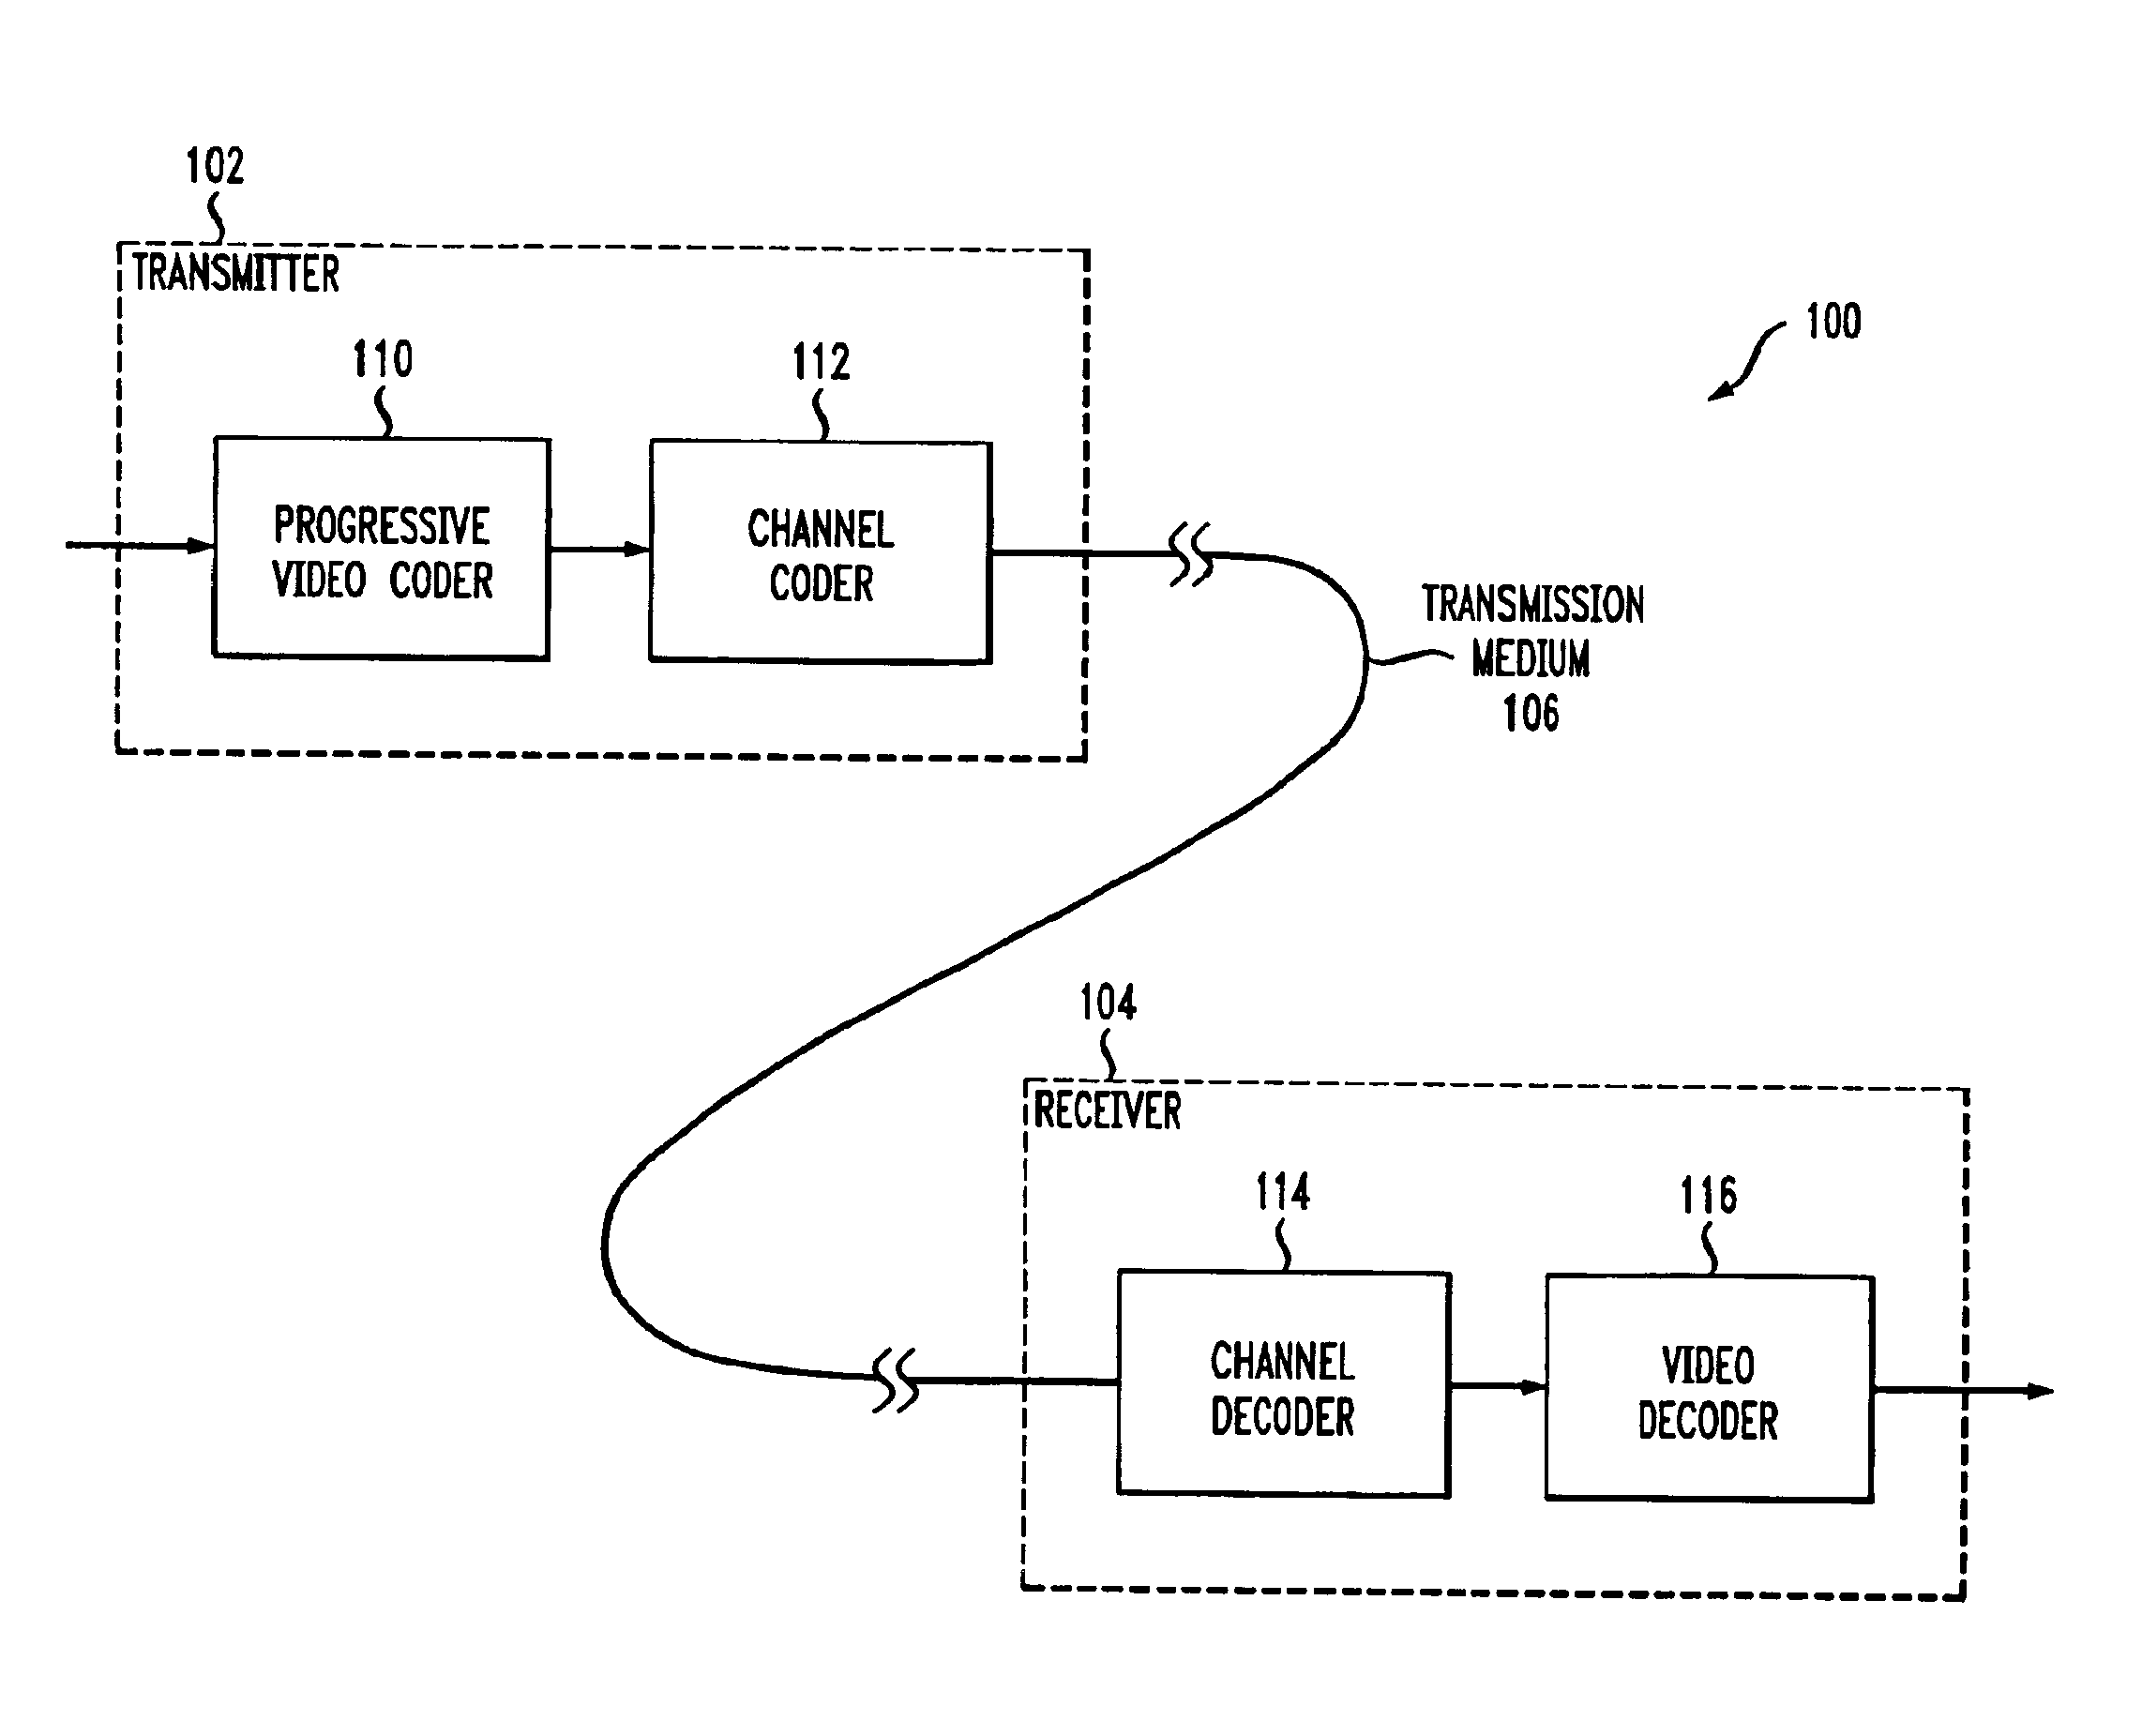 Method and apparatus for video transmission over a heterogeneous network using progressive video coding